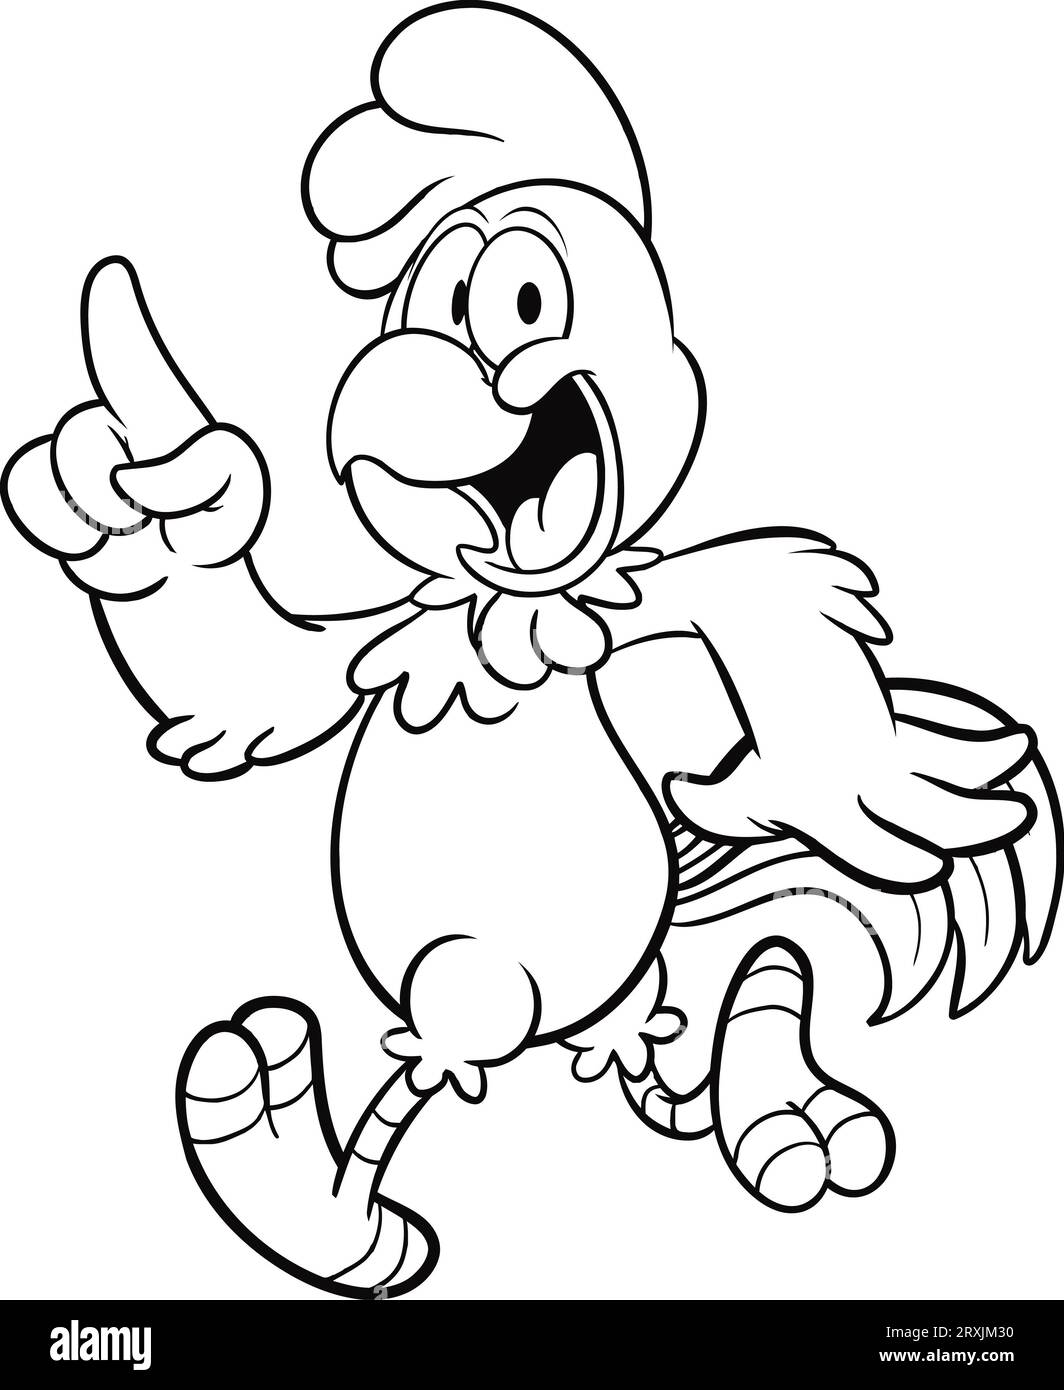 Cute Cartoon rooster coloring page for kids Stock Photo